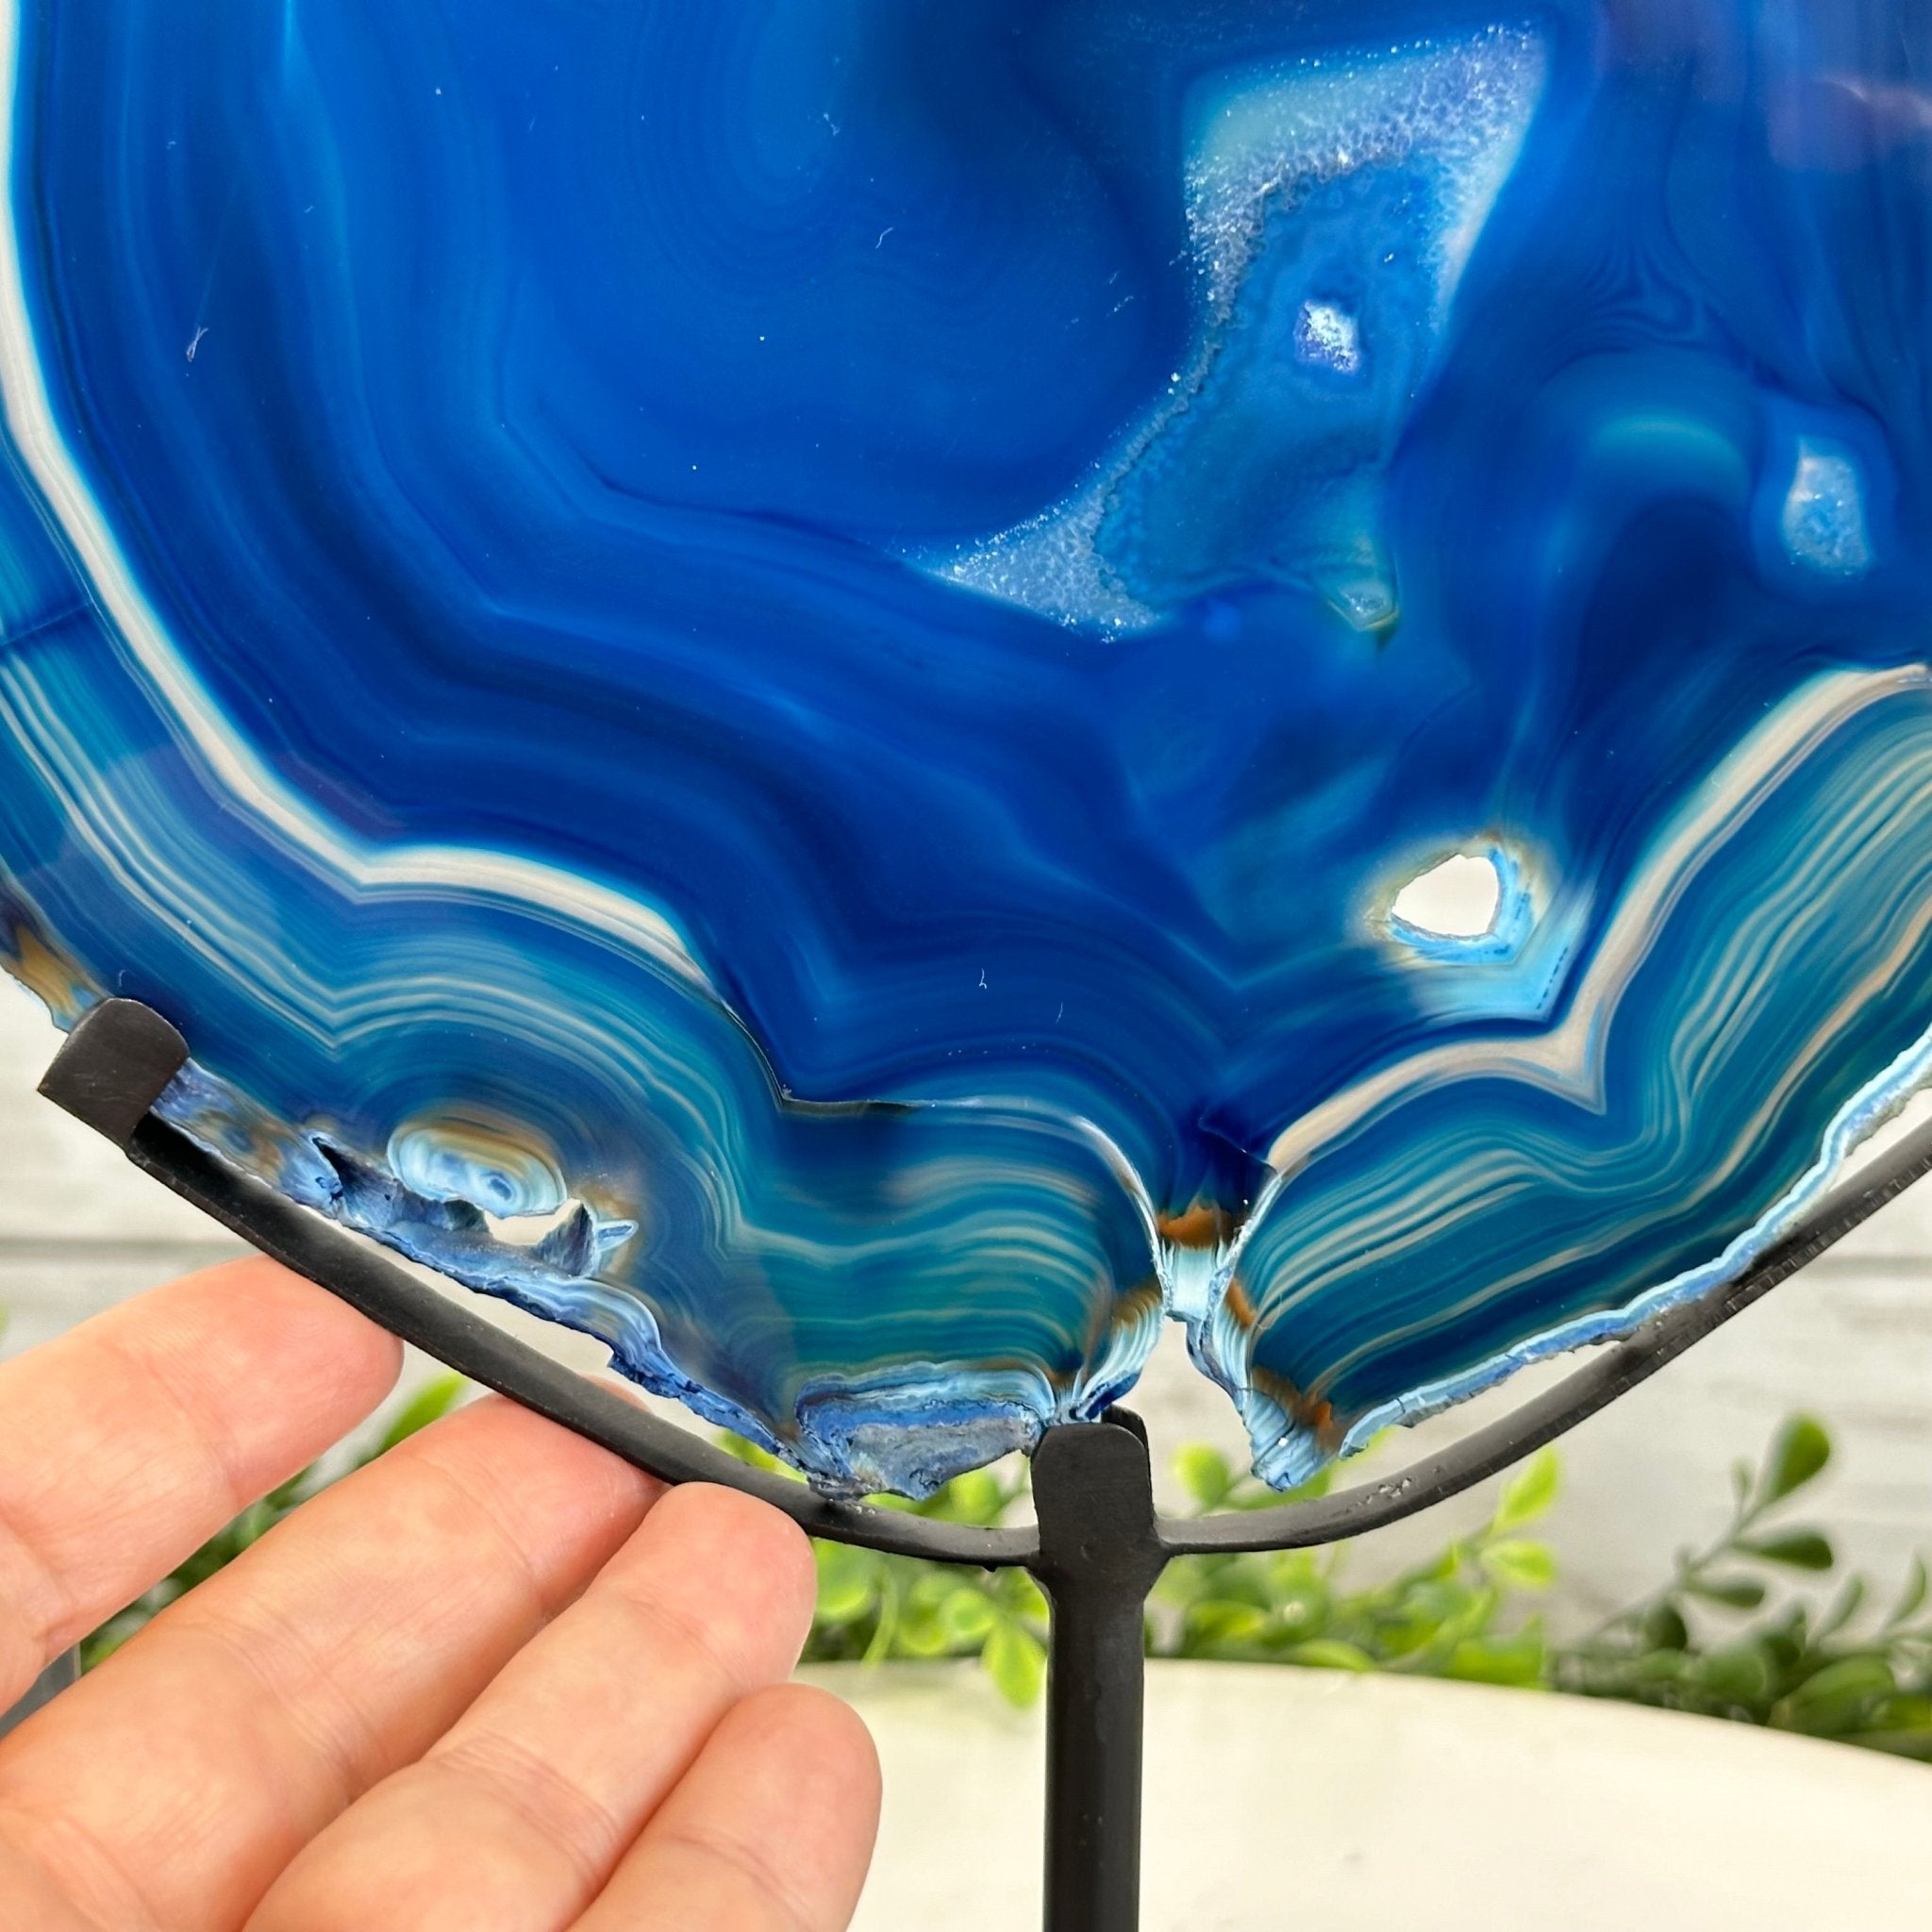 Brazilian Blue Agate Slice on a Metal Stand, 11.5" Tall #5055-0134 - Brazil GemsBrazil GemsBrazilian Blue Agate Slice on a Metal Stand, 11.5" Tall #5055-0134Slices on Fixed Bases5055-0134